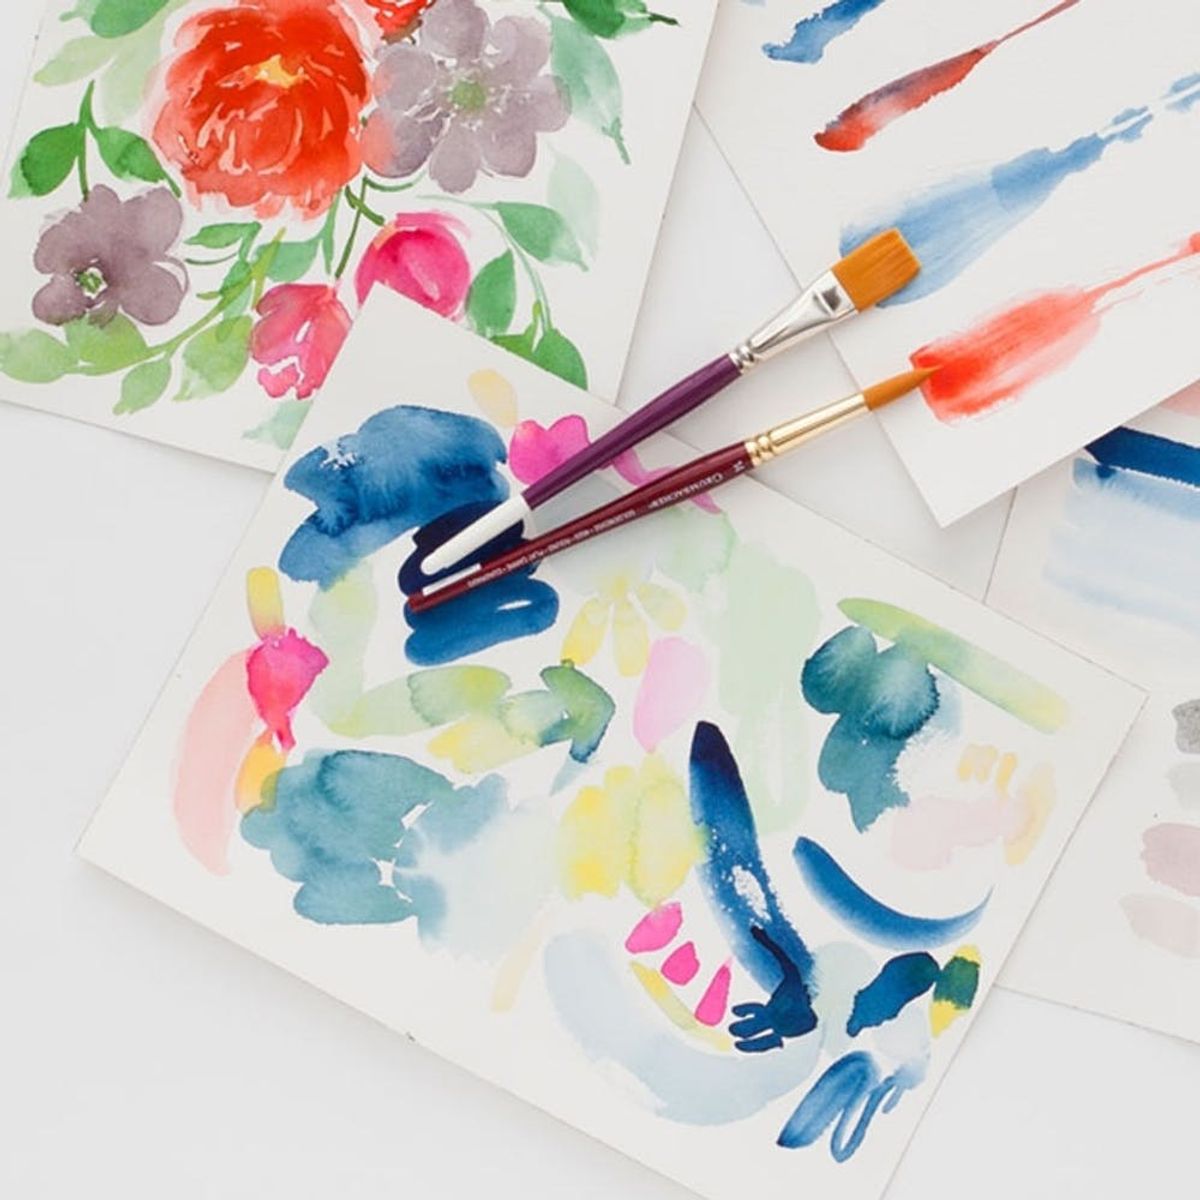 Kickstart Your Creativity: Try This Floral Watercolor Tutorial